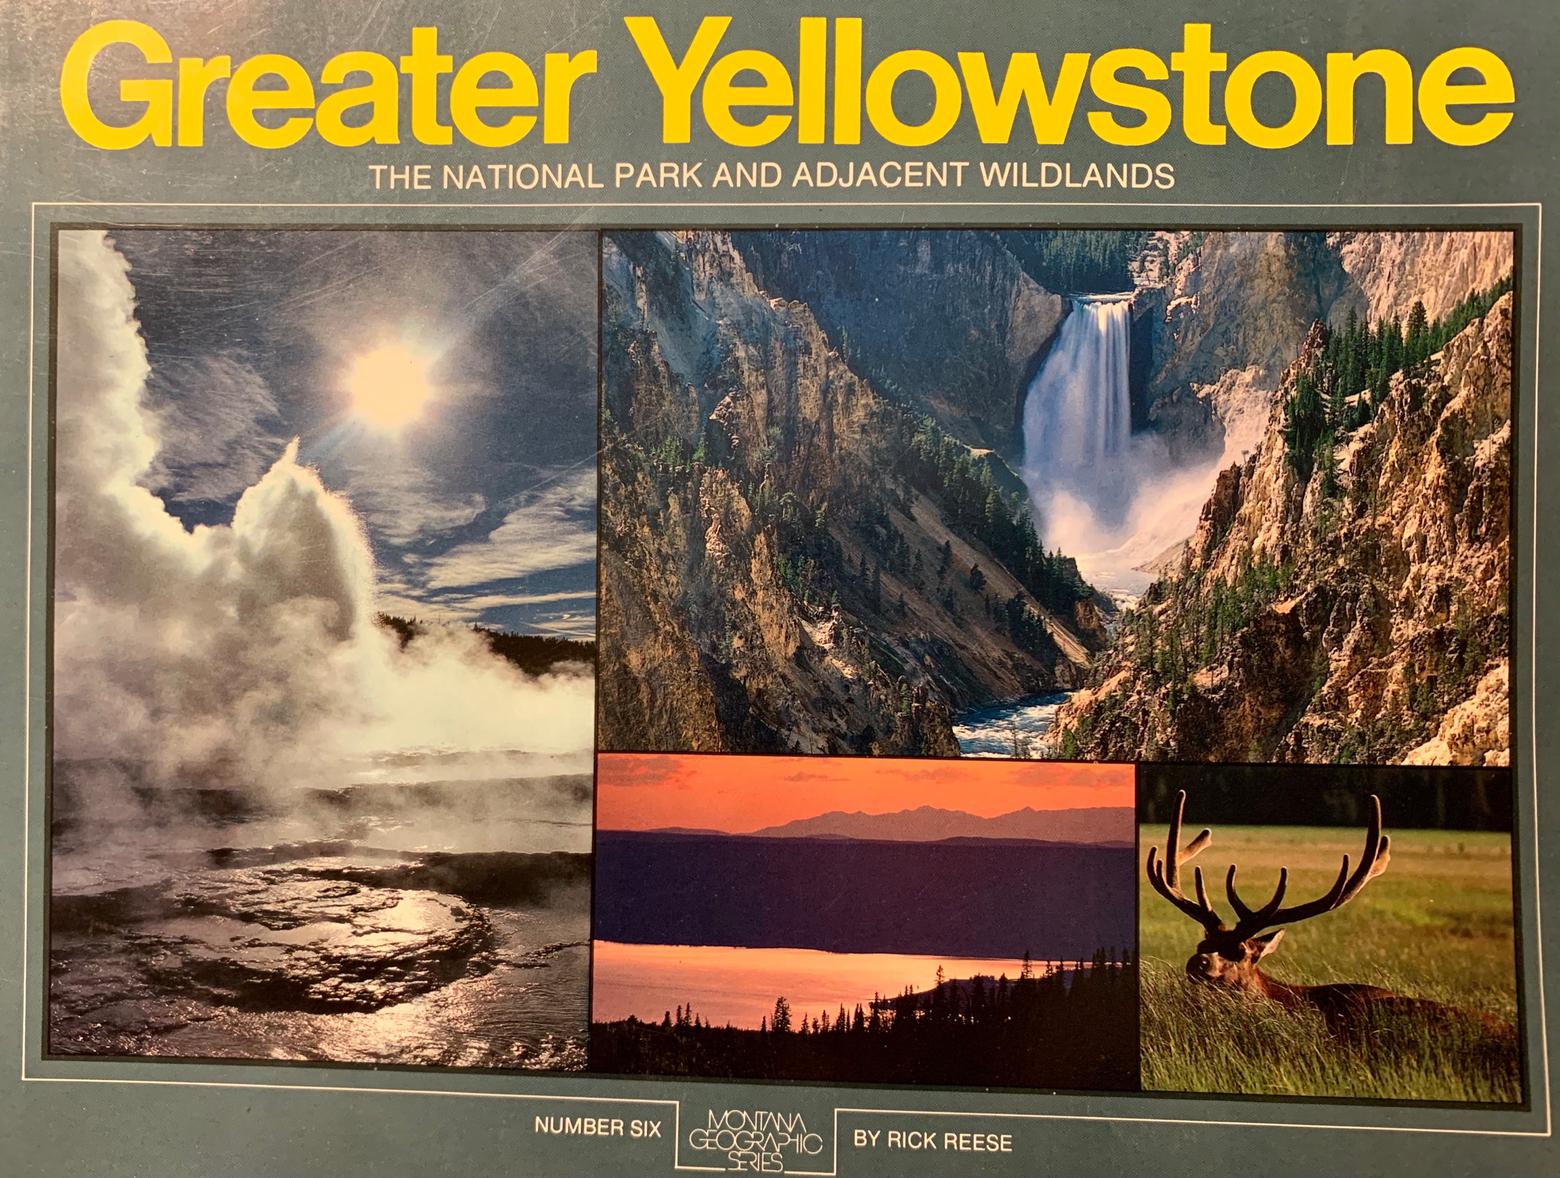 Reese's 1984 book brought a national centrifugal focus on the Greater Yellowstone Ecosystem as the cradle of modern landscape conservation in the Lower 48. Just a few years after its publication, the Congressional Research Service launched an investigation into how federal land management activities occurring on adjacent national parks, forests, and BLM lands were often in contradiction with each other in terms of stated goals. And often, wildlife and the habitat it needs to survive was being sacrificed to industrial activities such as logging, mining and fossil fuel development. 